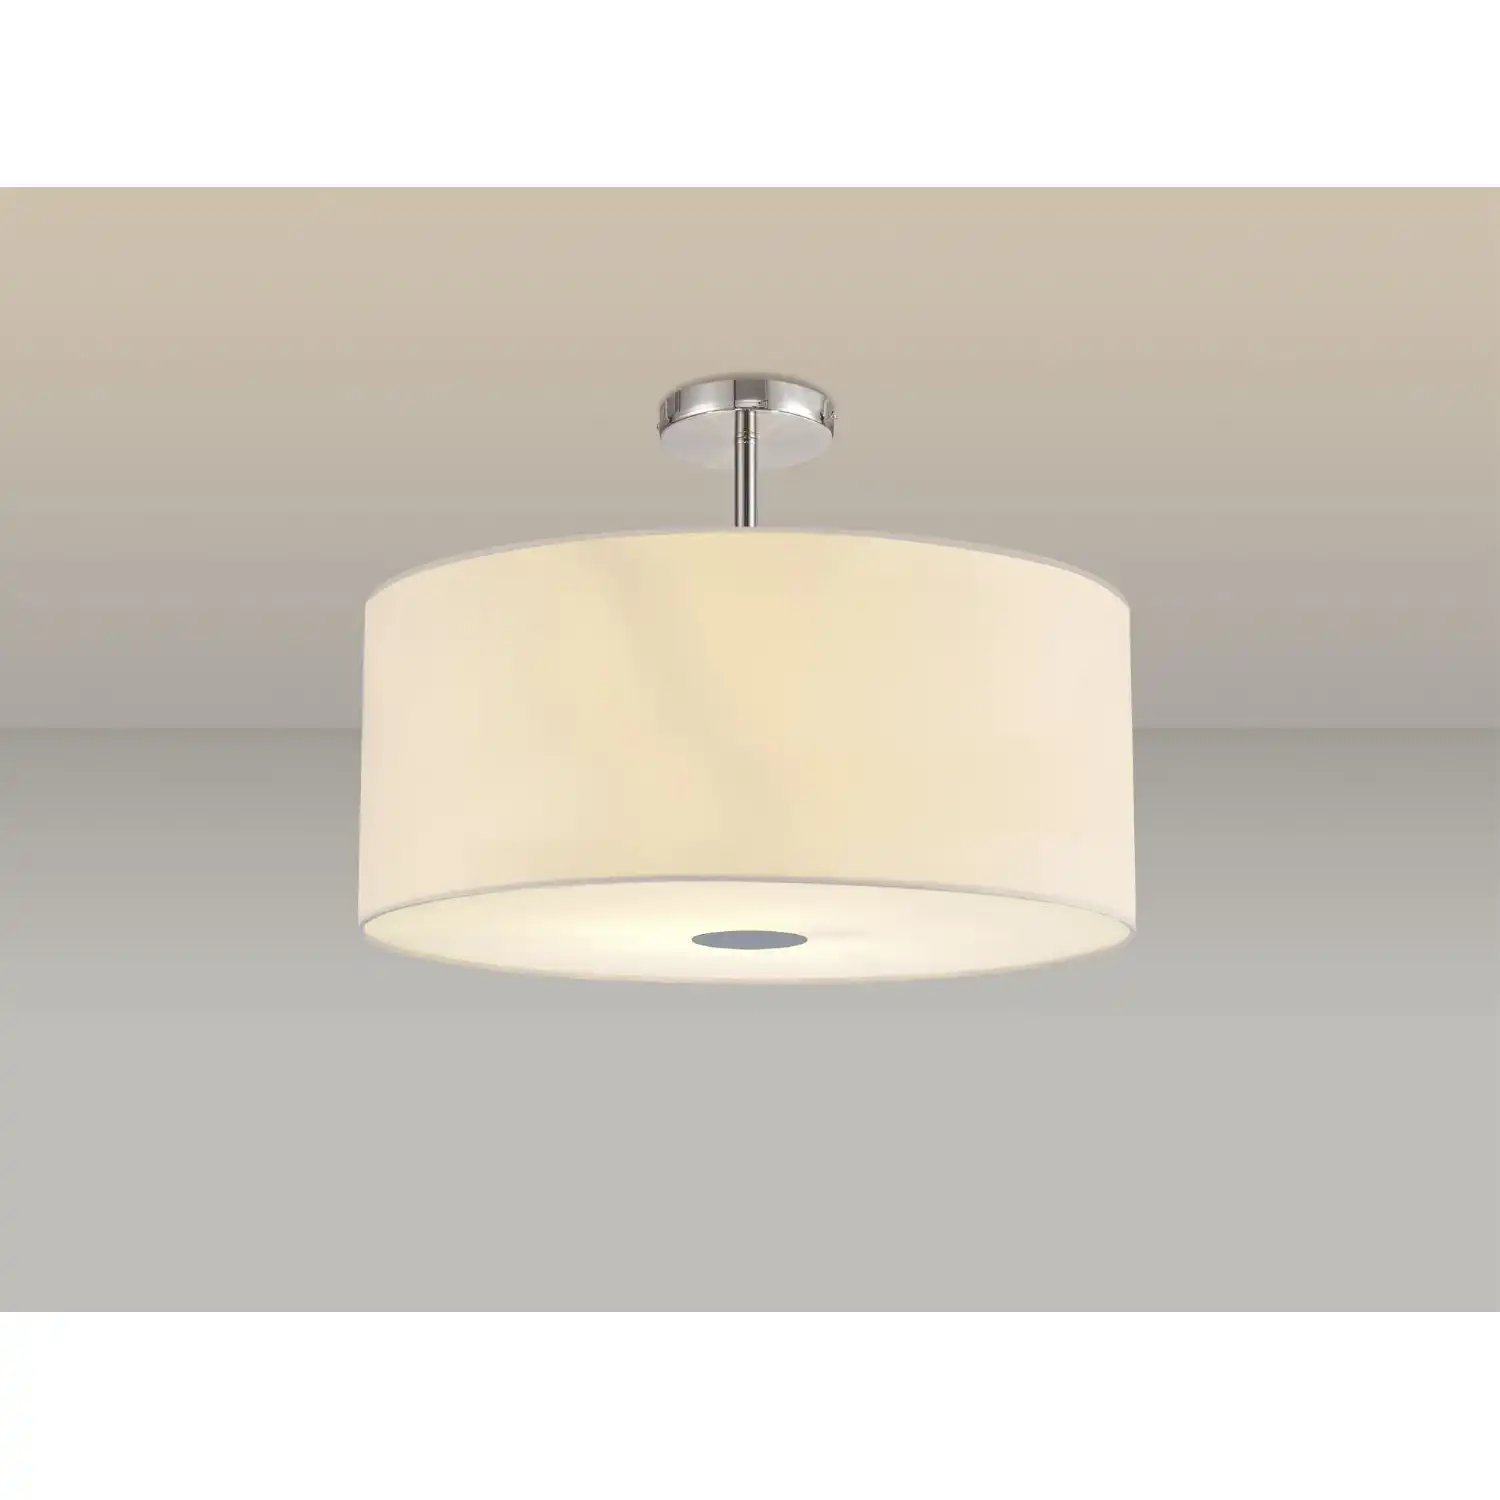 Baymont Polished Chrome 5 Light E27 Drop Flush Ceiling Fixture c w 600 Faux Silk Shade, Ivory Pearl White Laminate And 600mm Frosted PC Acrylic Diffuser